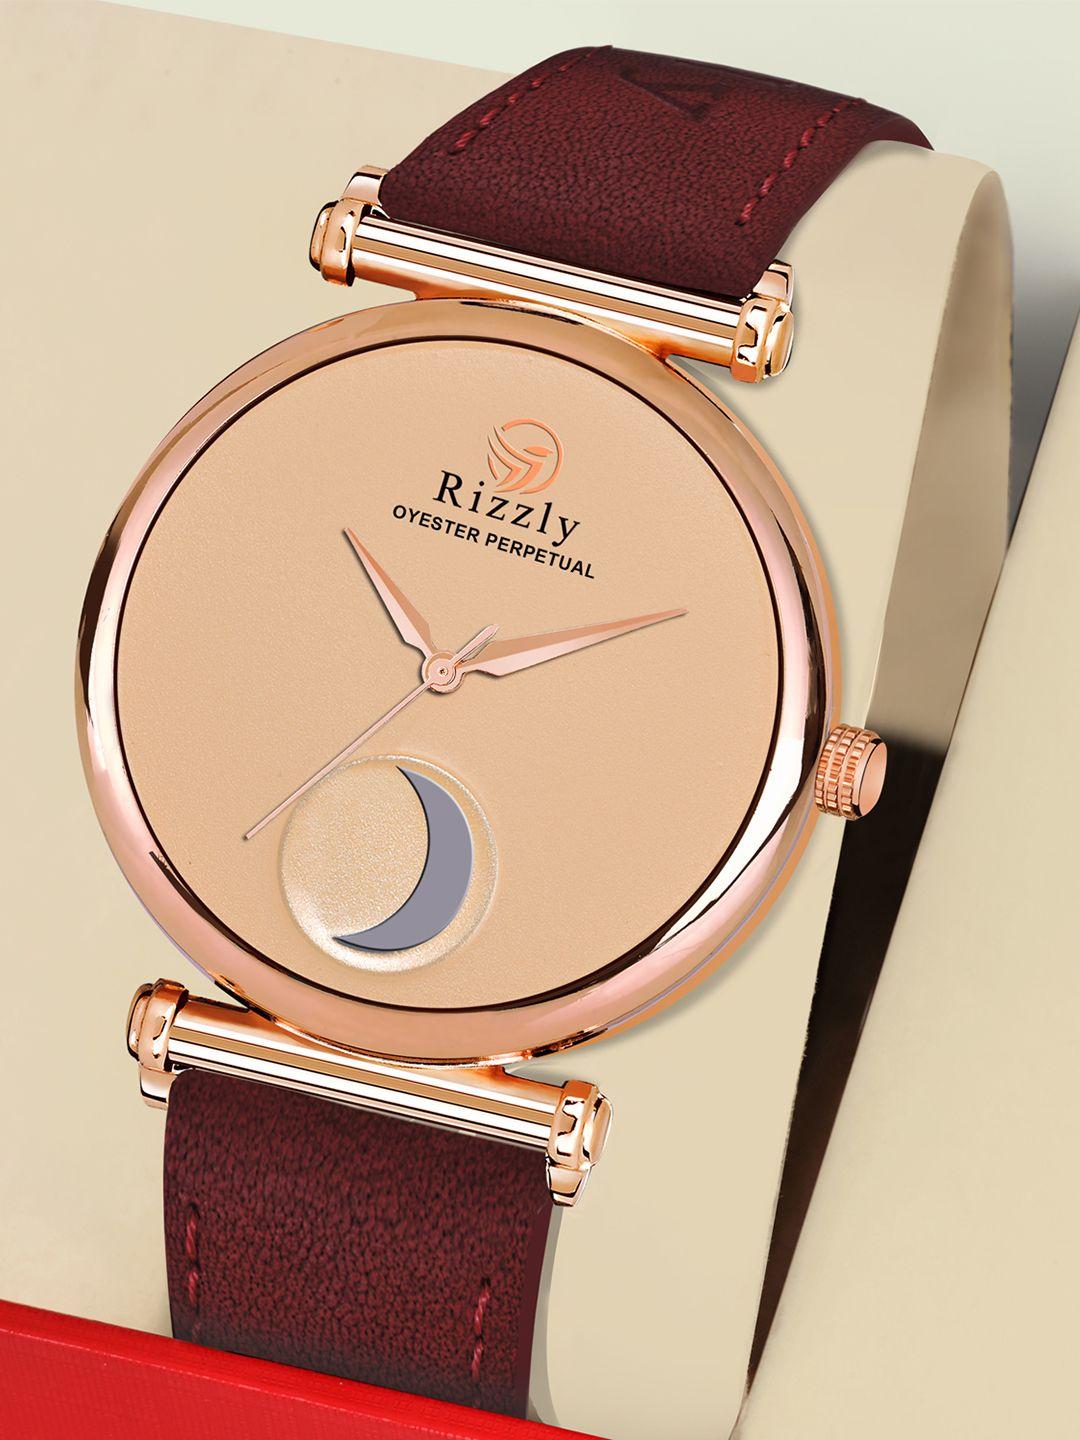 rizzly men rose gold-toned brass dial & neon red leather straps analogue watch rz-301